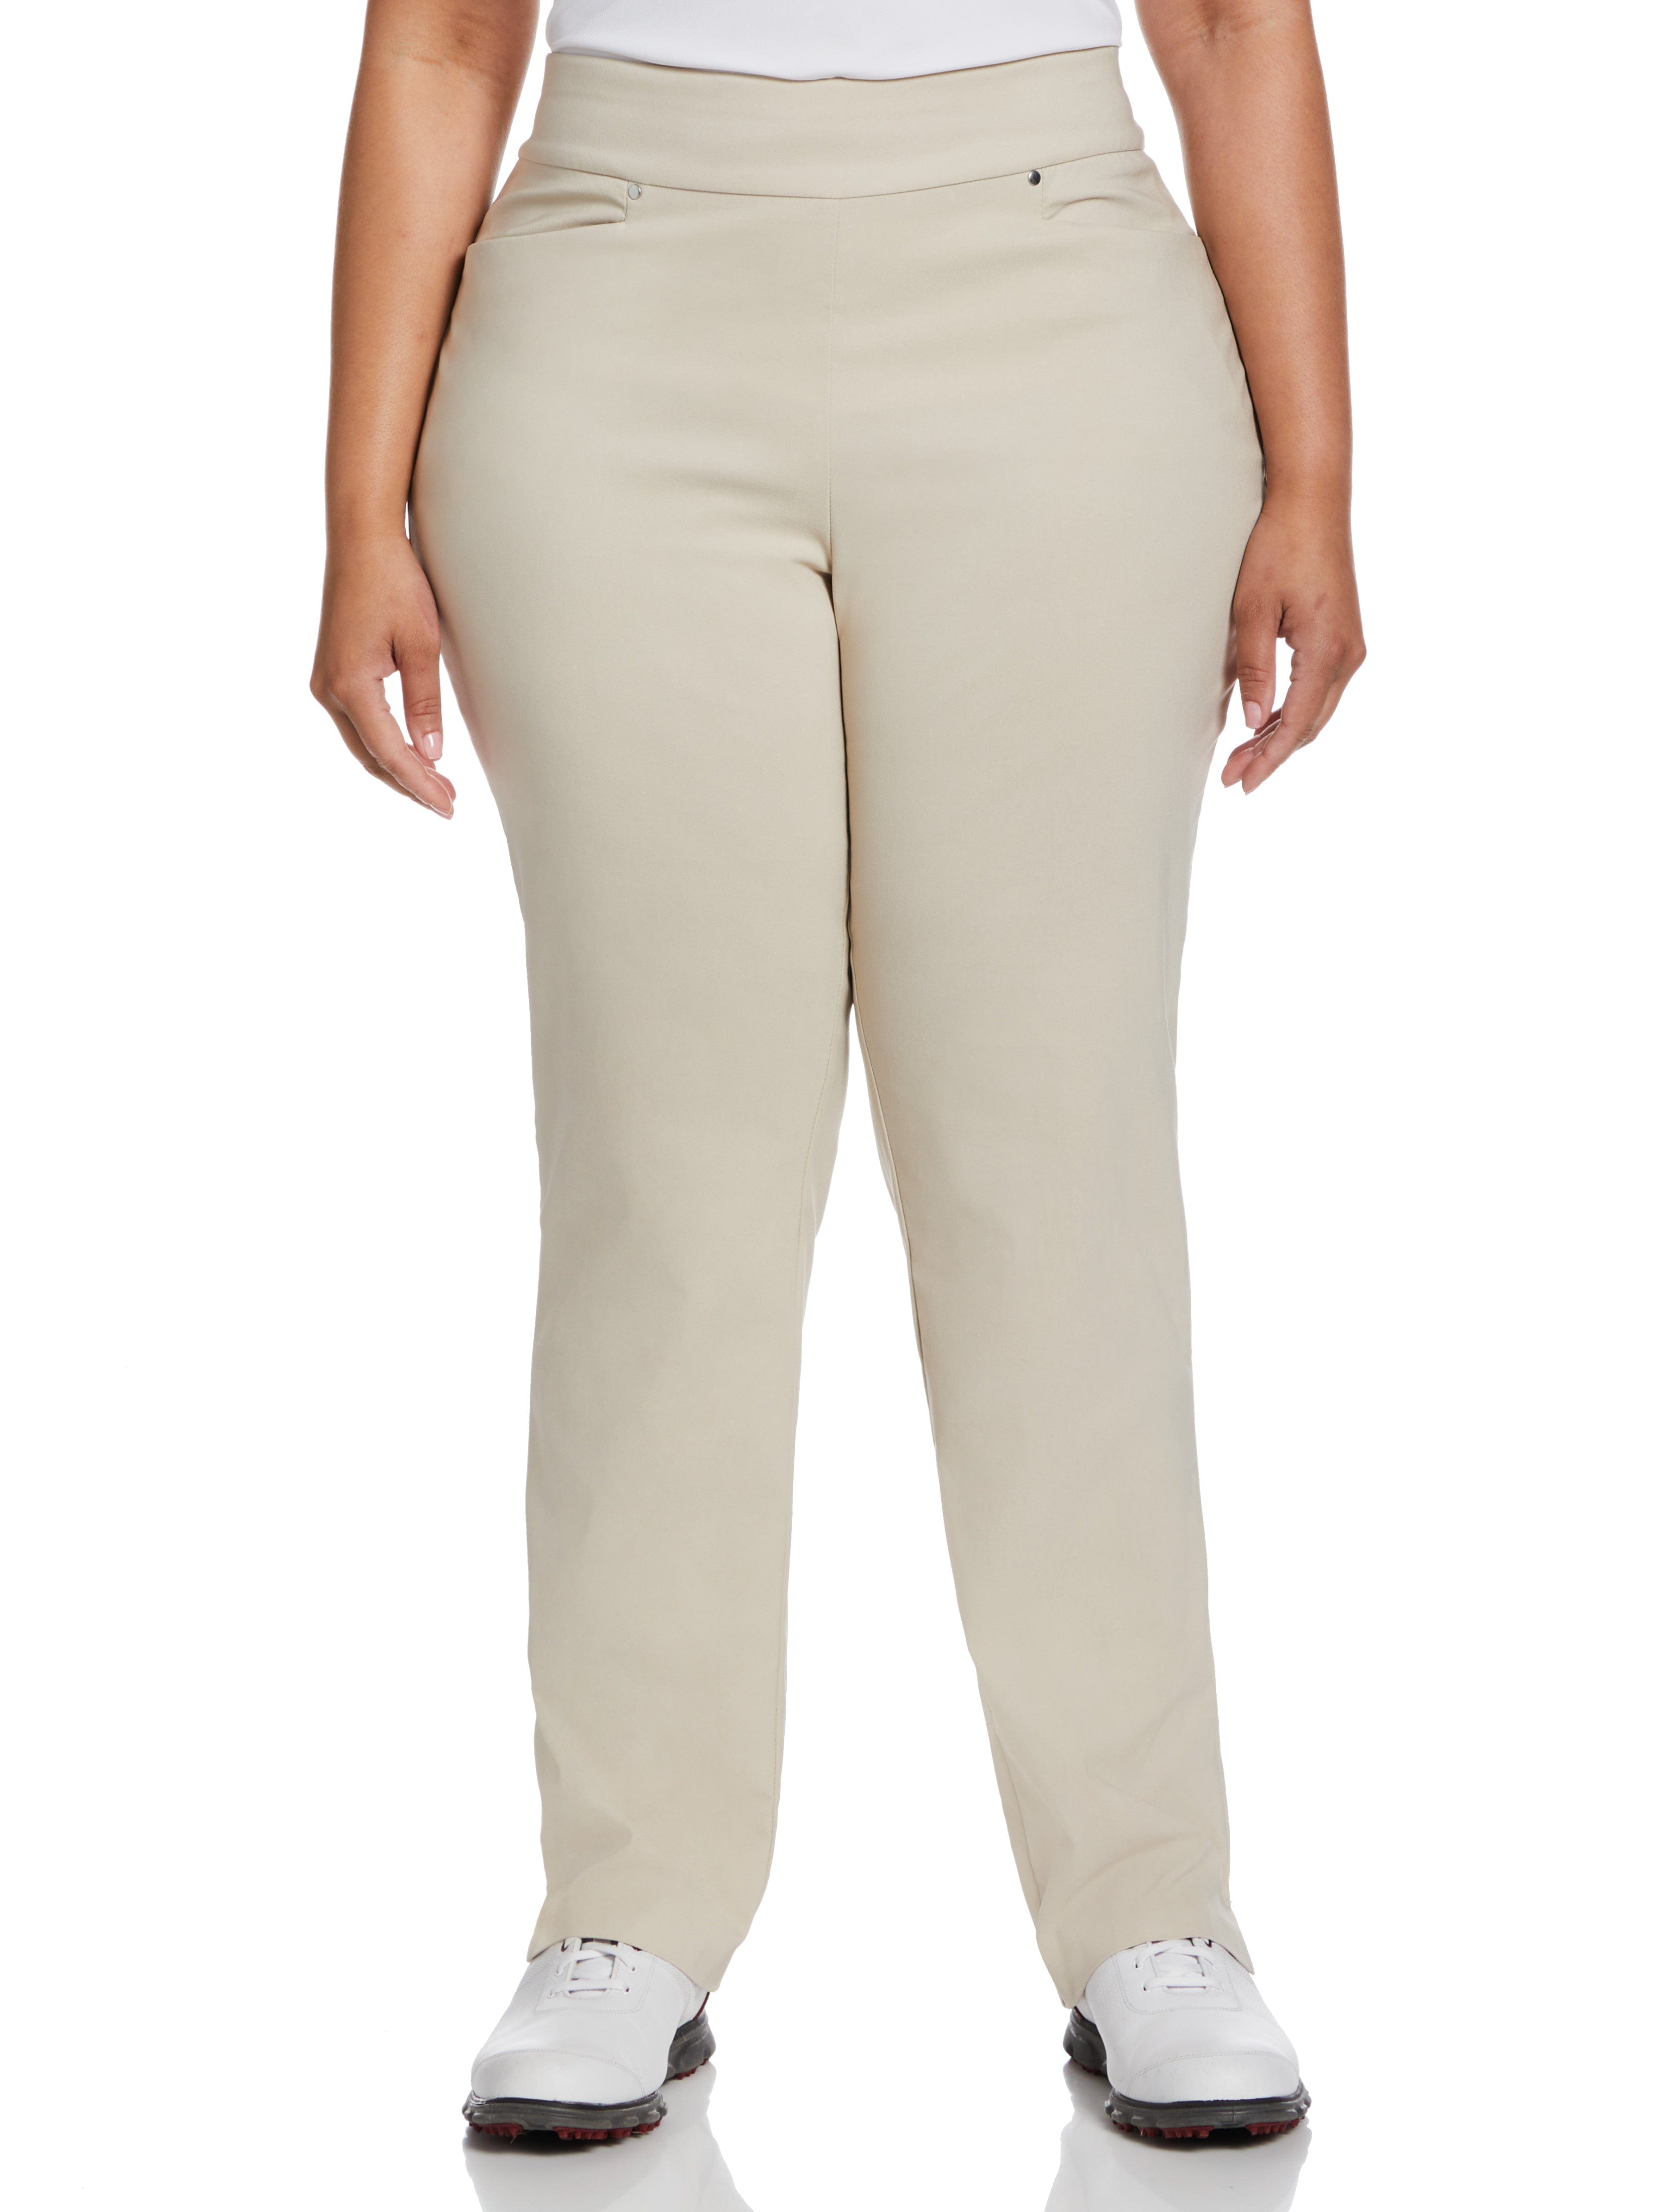 Women's Plus Size Pull-On Golf Pant